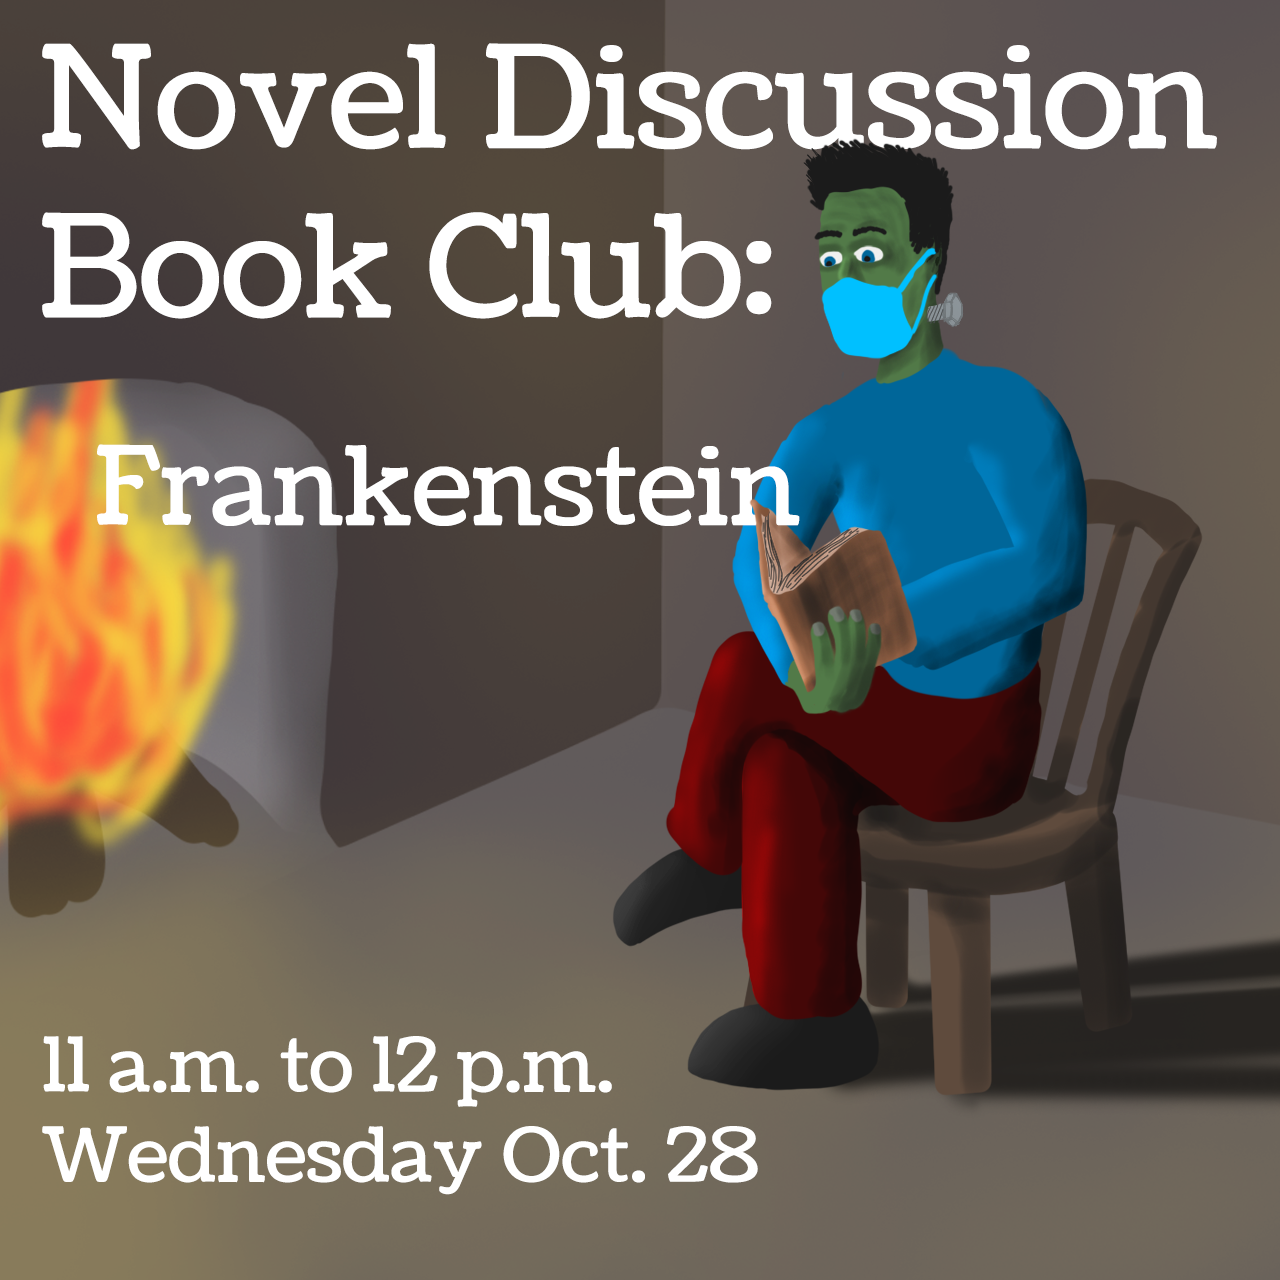 Frankenstein's monster sits by a fireplace, wearing a mask & reading a book. Text: "Novel Discussion Book Club: Frankenstein, 11 a.m. to 12 p.m., Wednesday Oct. 28"